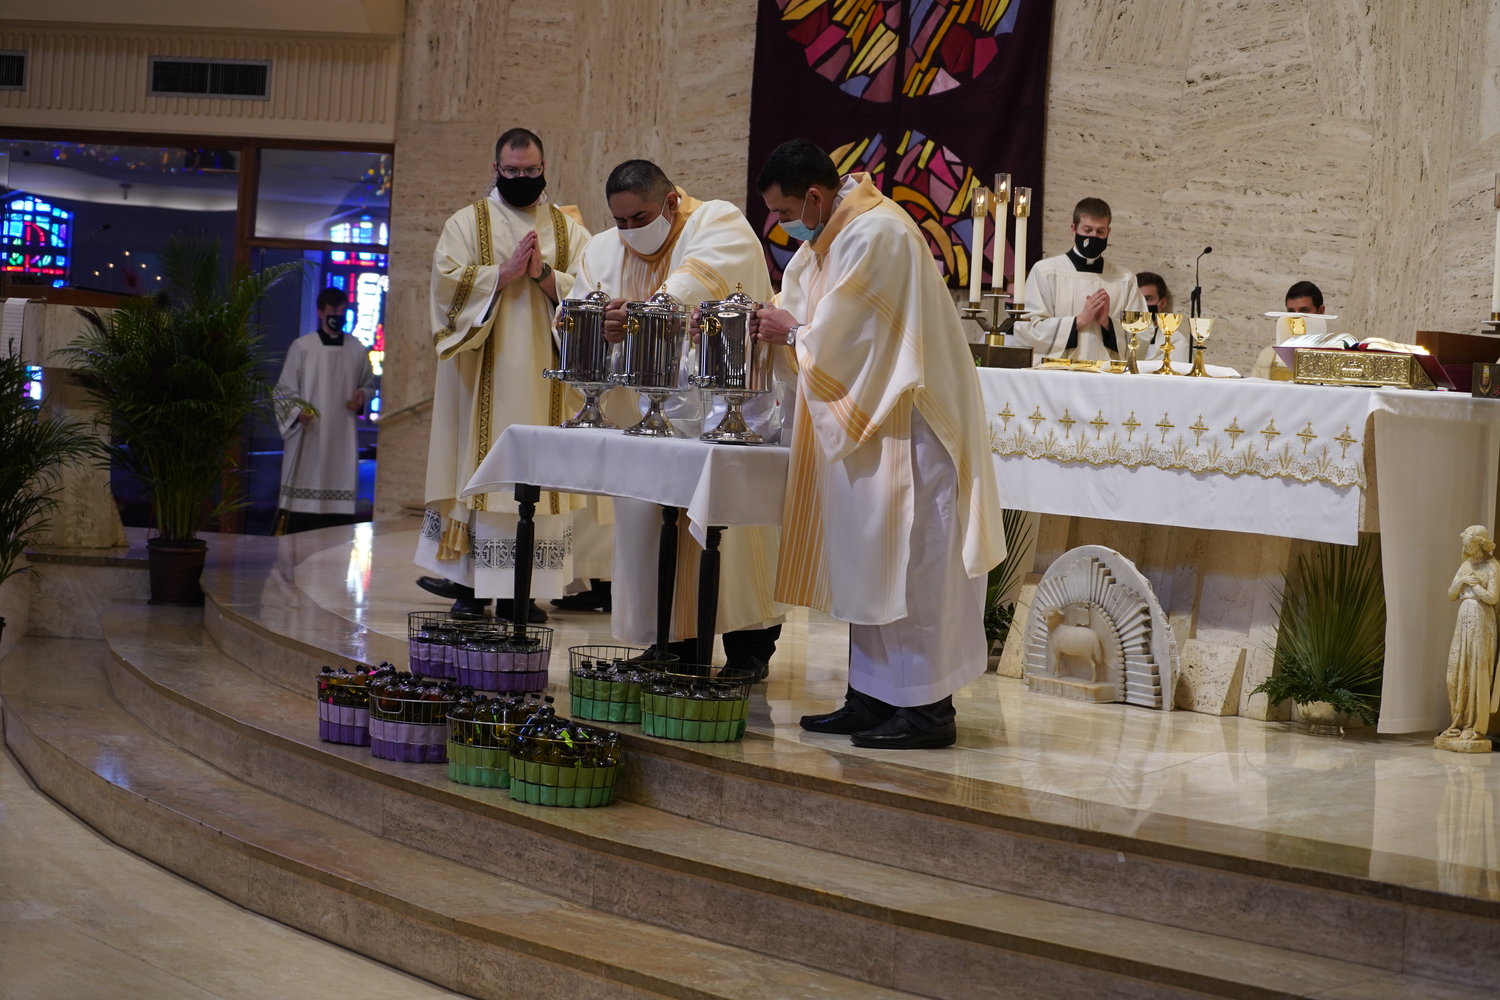 Rev. Mr. Derek Hooper observes Deacon Louis Reyes and Deacon Santos Rubio presenting the Oil of Catechumens and the Oil of the Sick during the Chrism Mass March 30 in the Cathedral of St. Joseph.